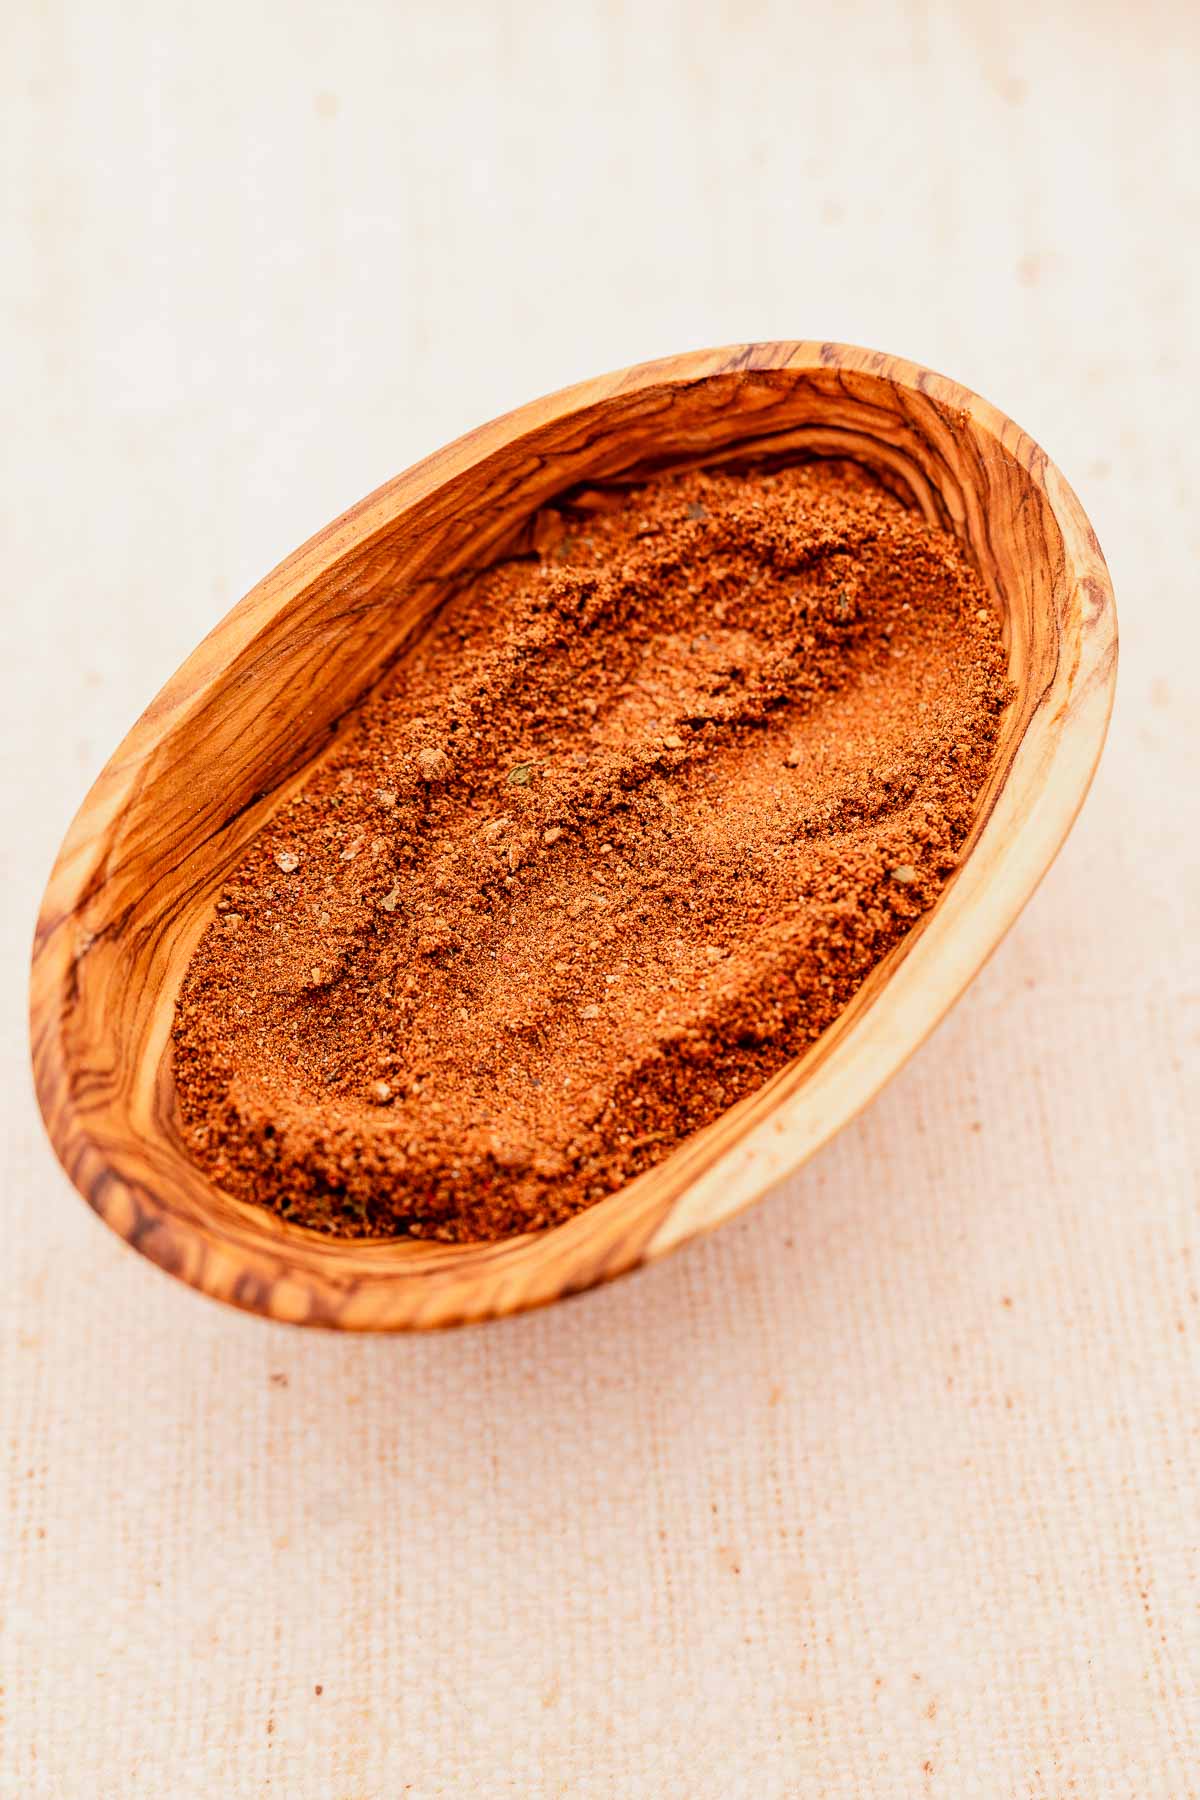 A wooden bowl filled with baharat, a brown powder.